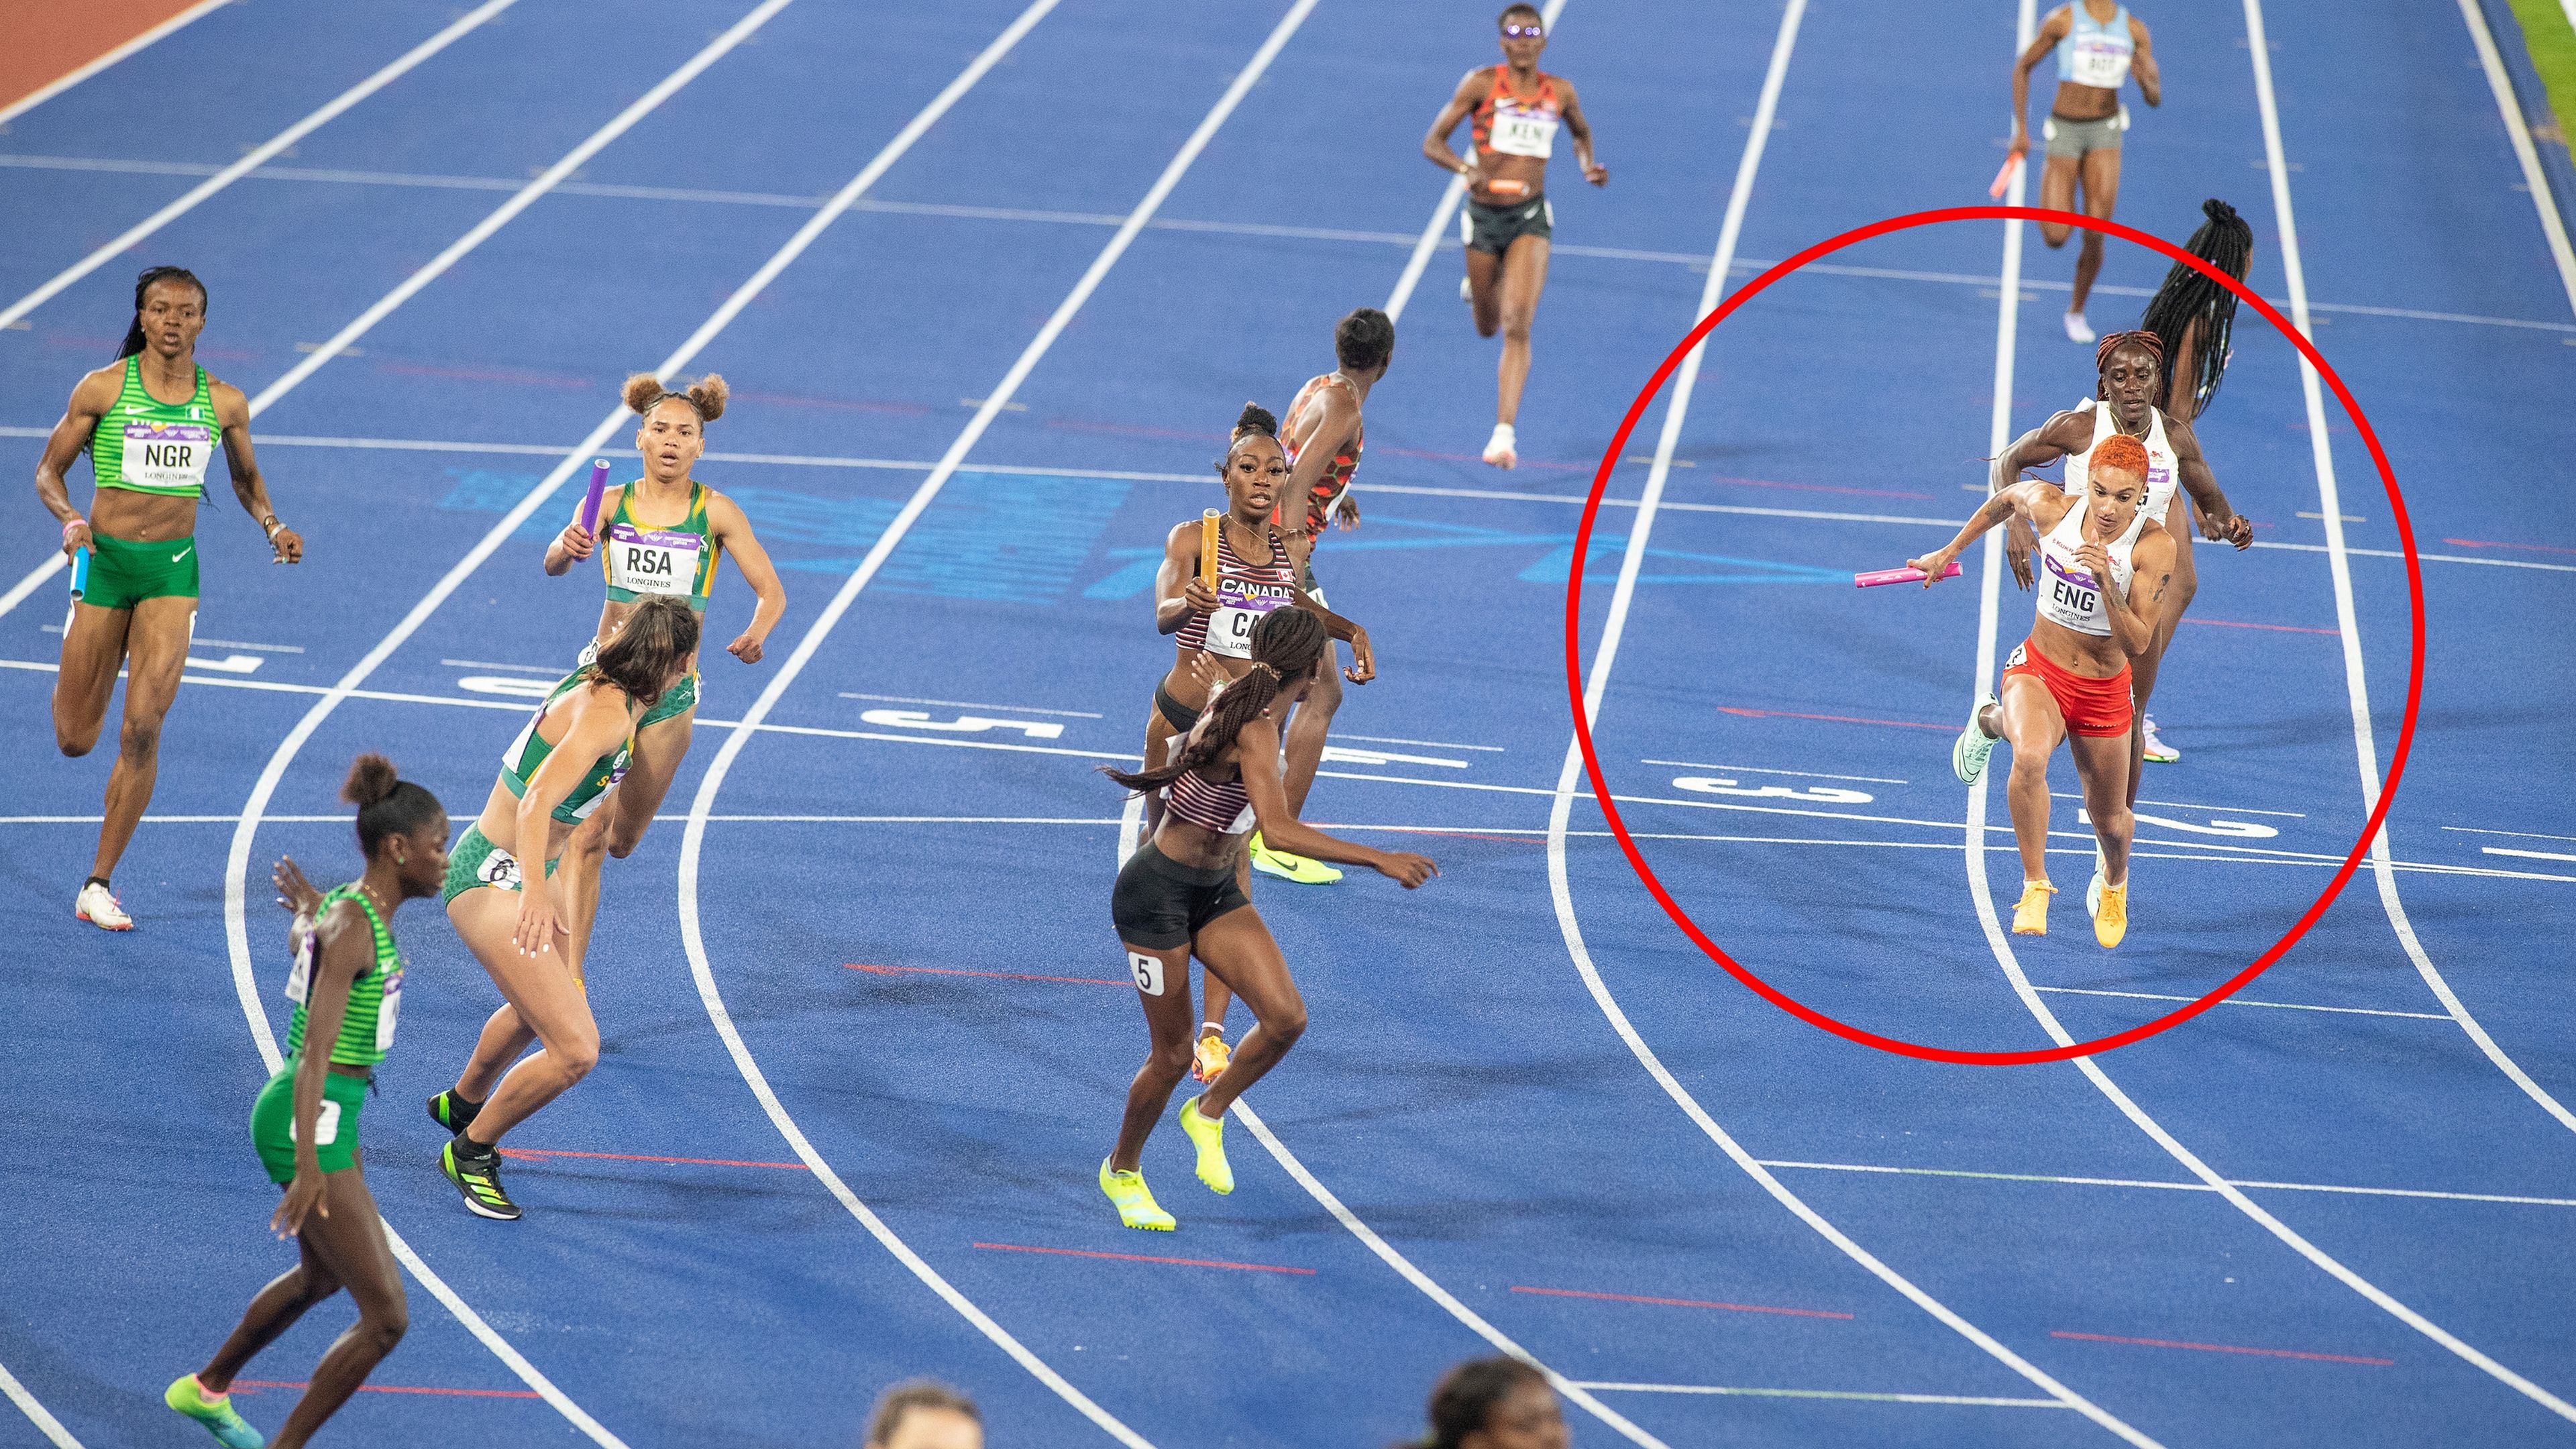 England relay team denied gold medal after baton change farce spoils victory lap